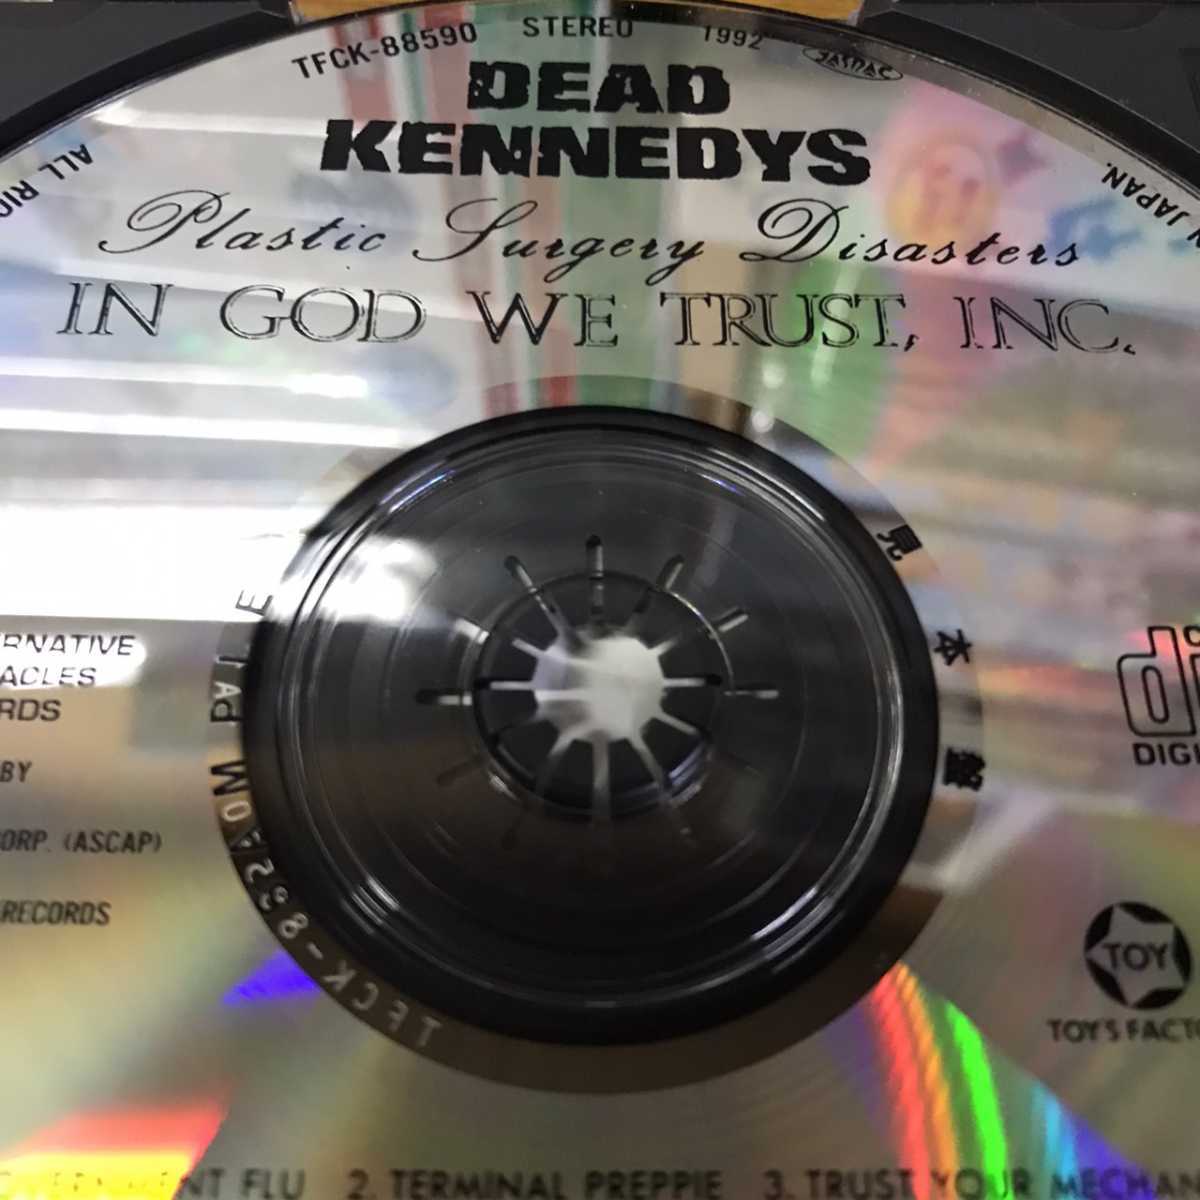 Dead Kennedys PROMO CD Plastic Surgery Disasters / In God We Trust, Inc._画像2